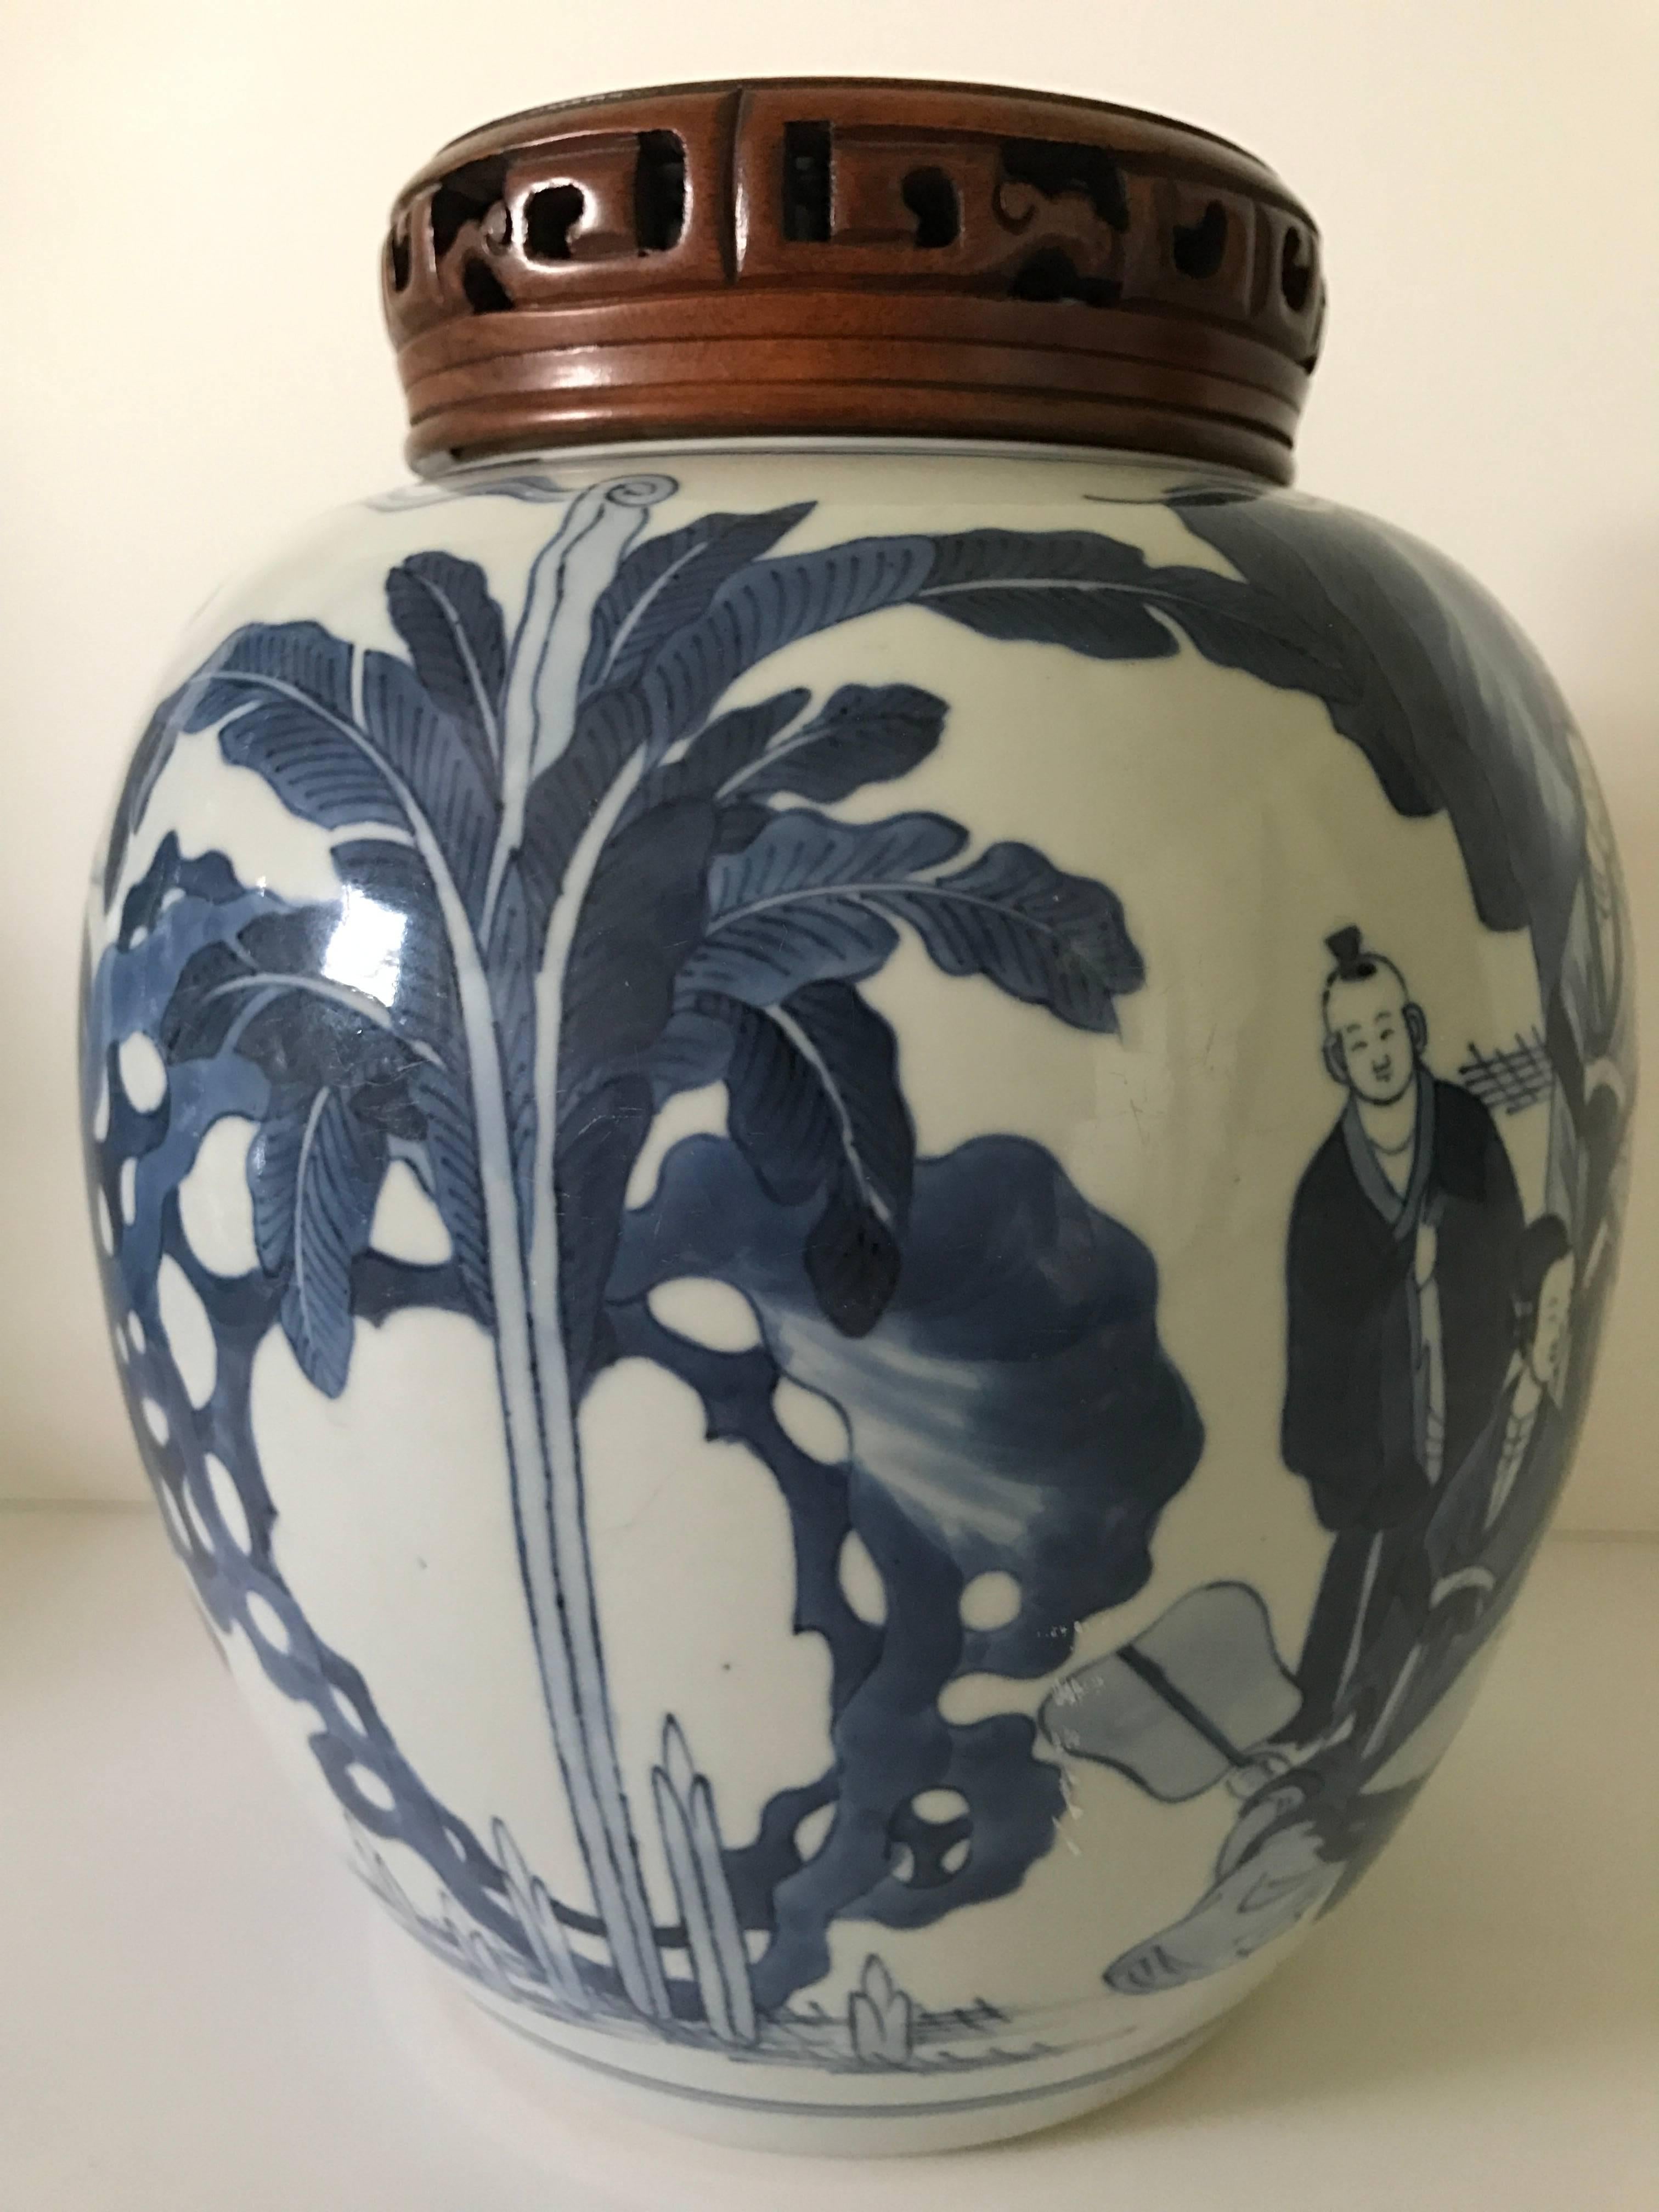 Porcelain Late 17th Century Kangxi Period Jar with Wooden Lid, 1662-1722